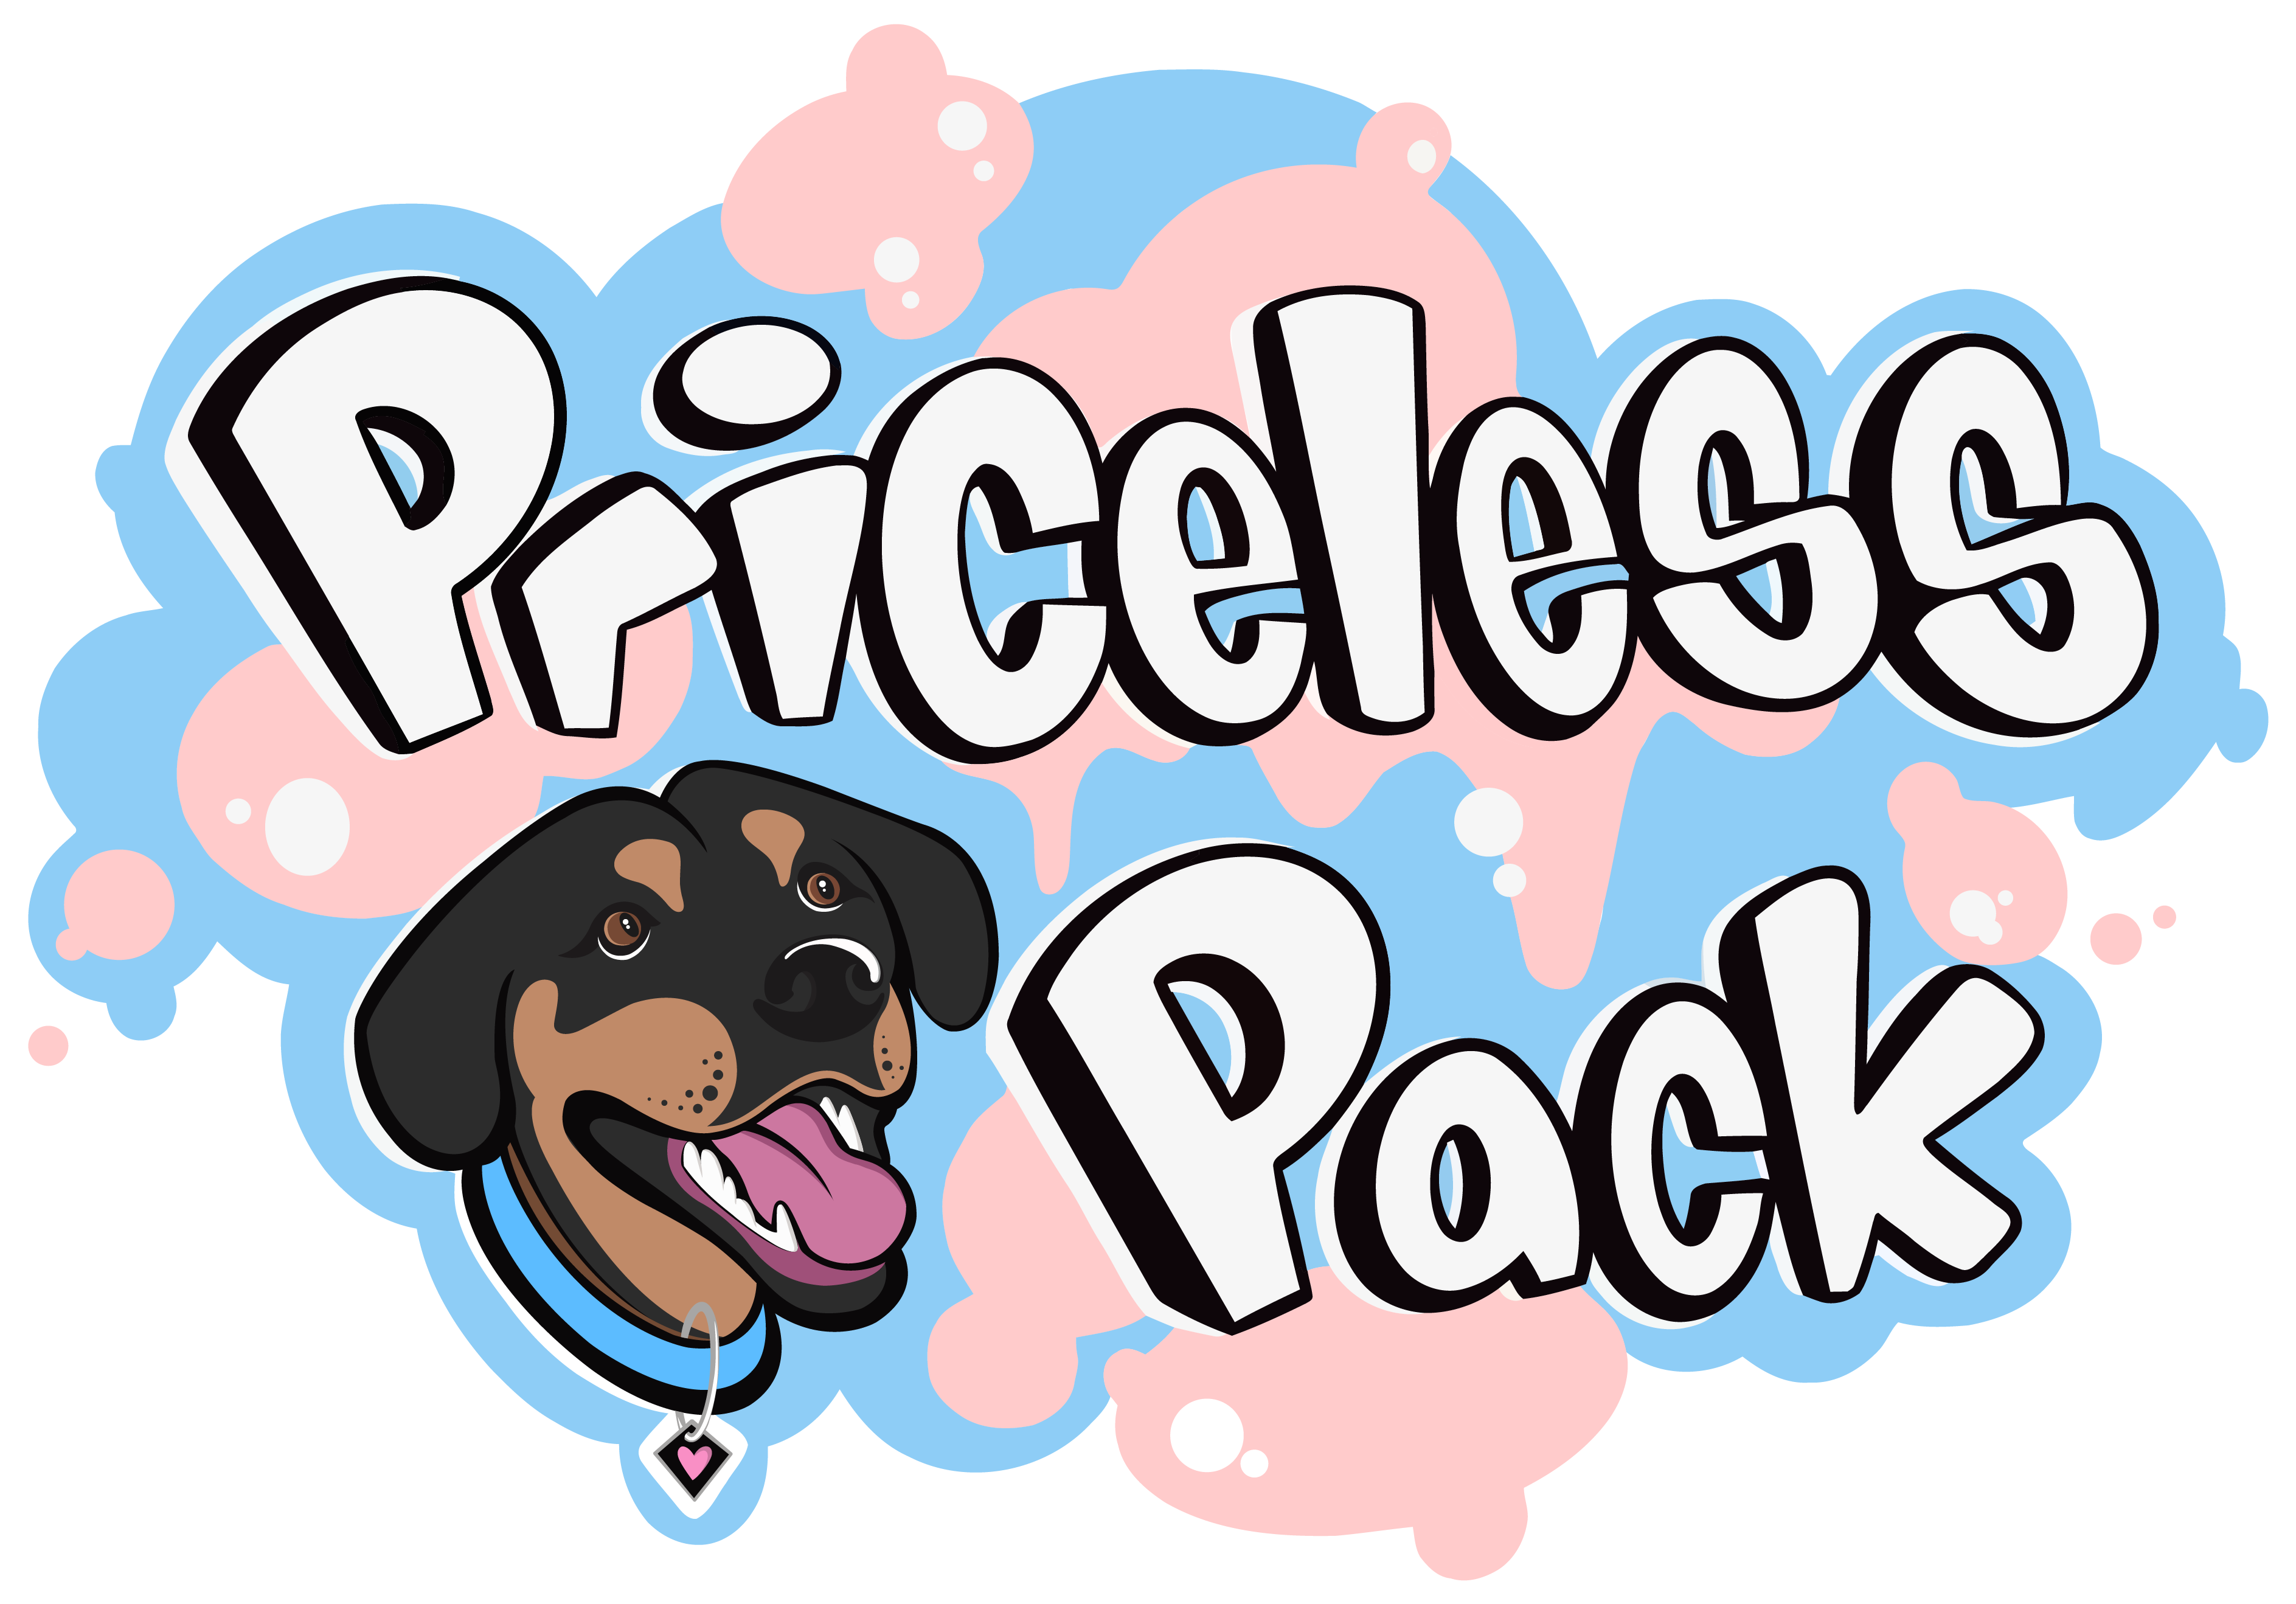 PRICELESS PACK | PLAY IS PRICELESS